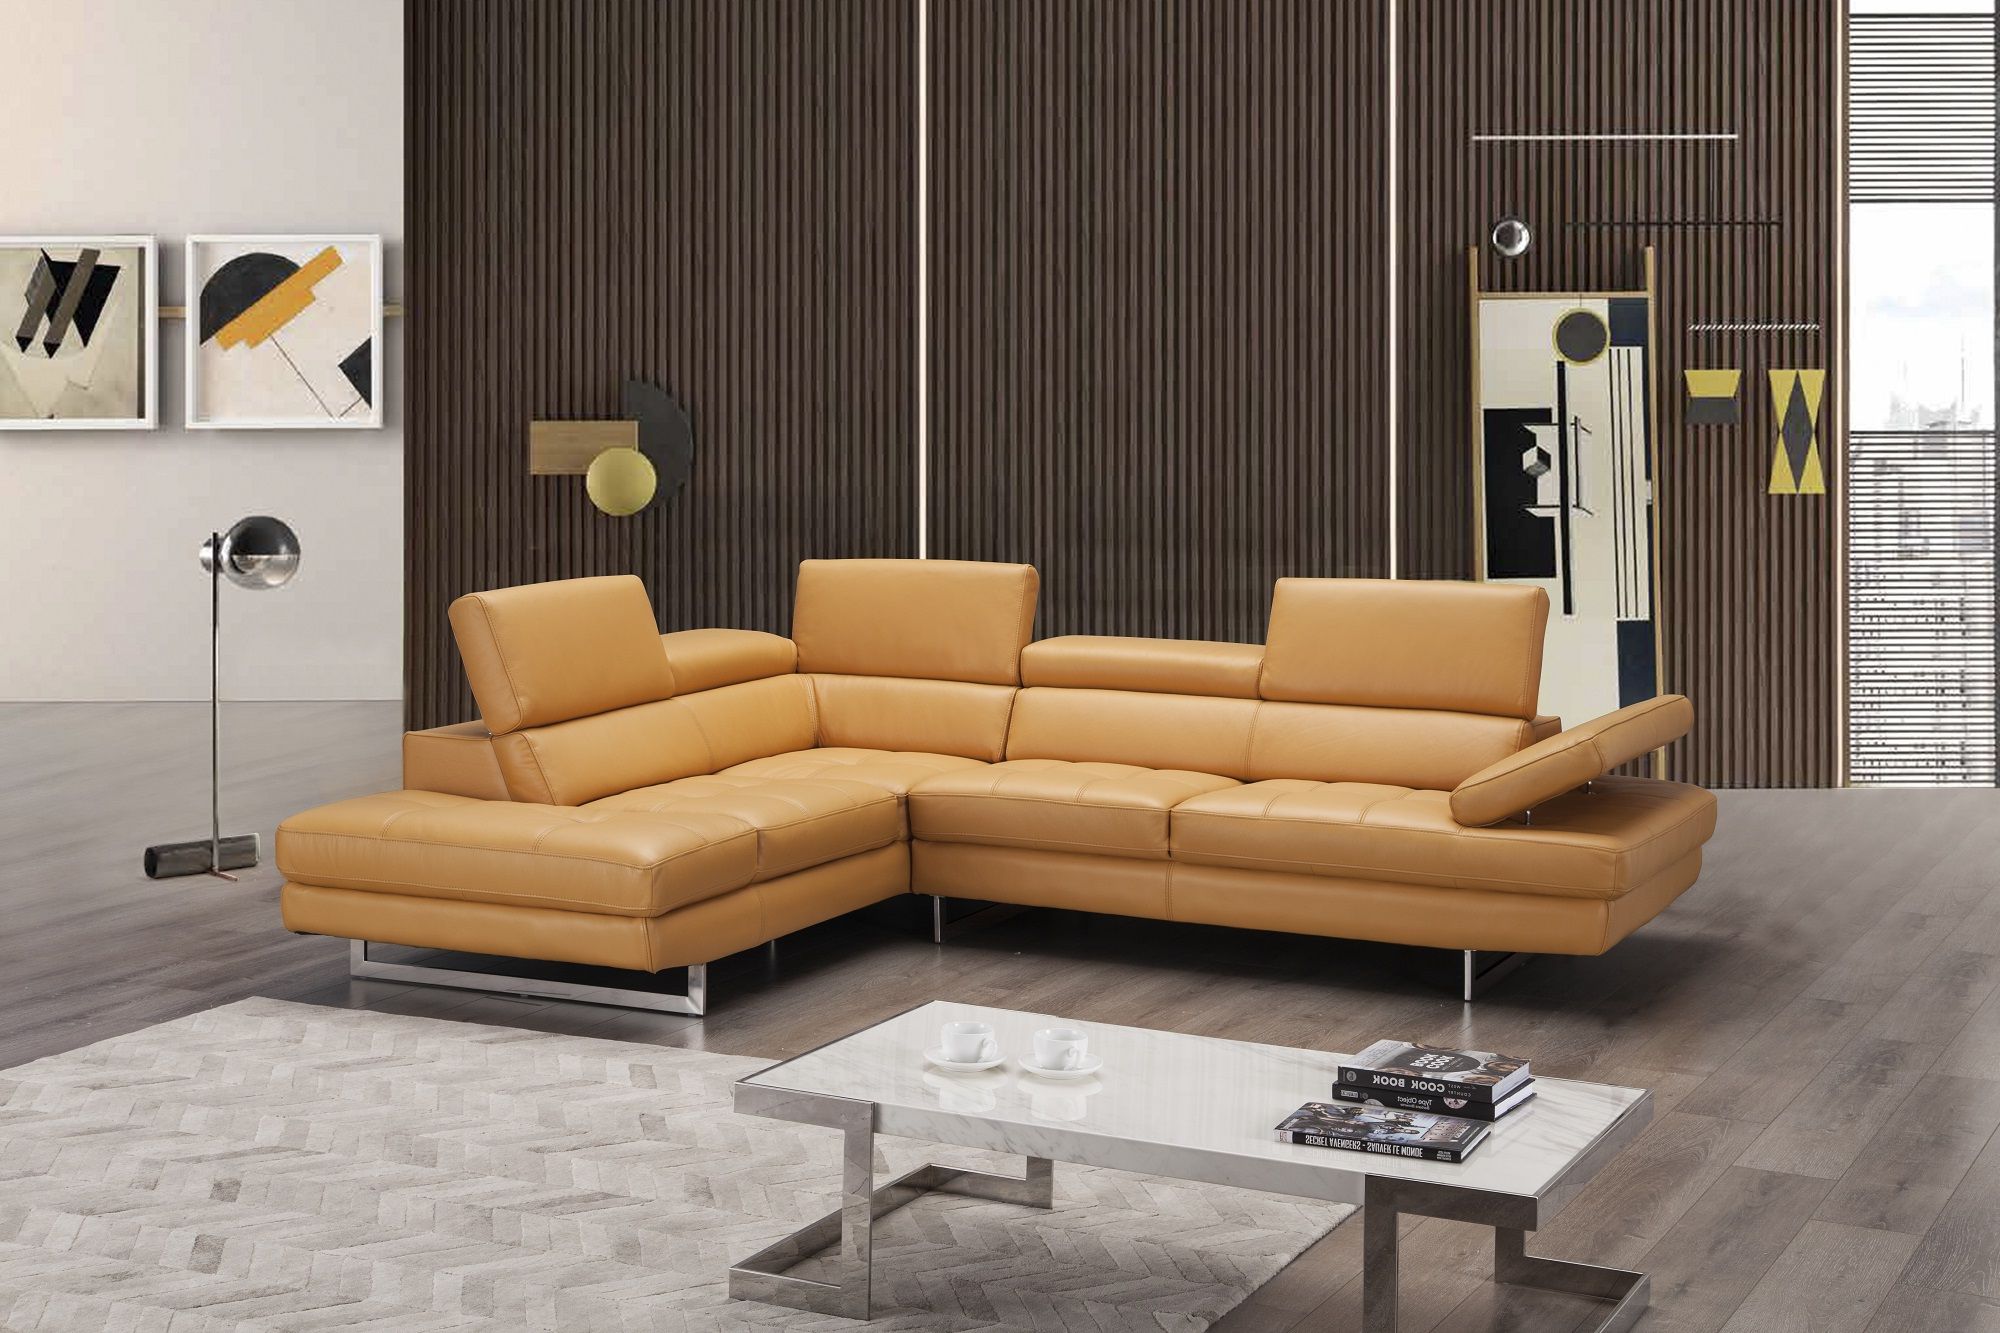 Elegant Modern Leather L Shape Sectional Washington Dc J&m Furniture Intended For Modern L Shaped Sofa Sectionals (Gallery 5 of 20)